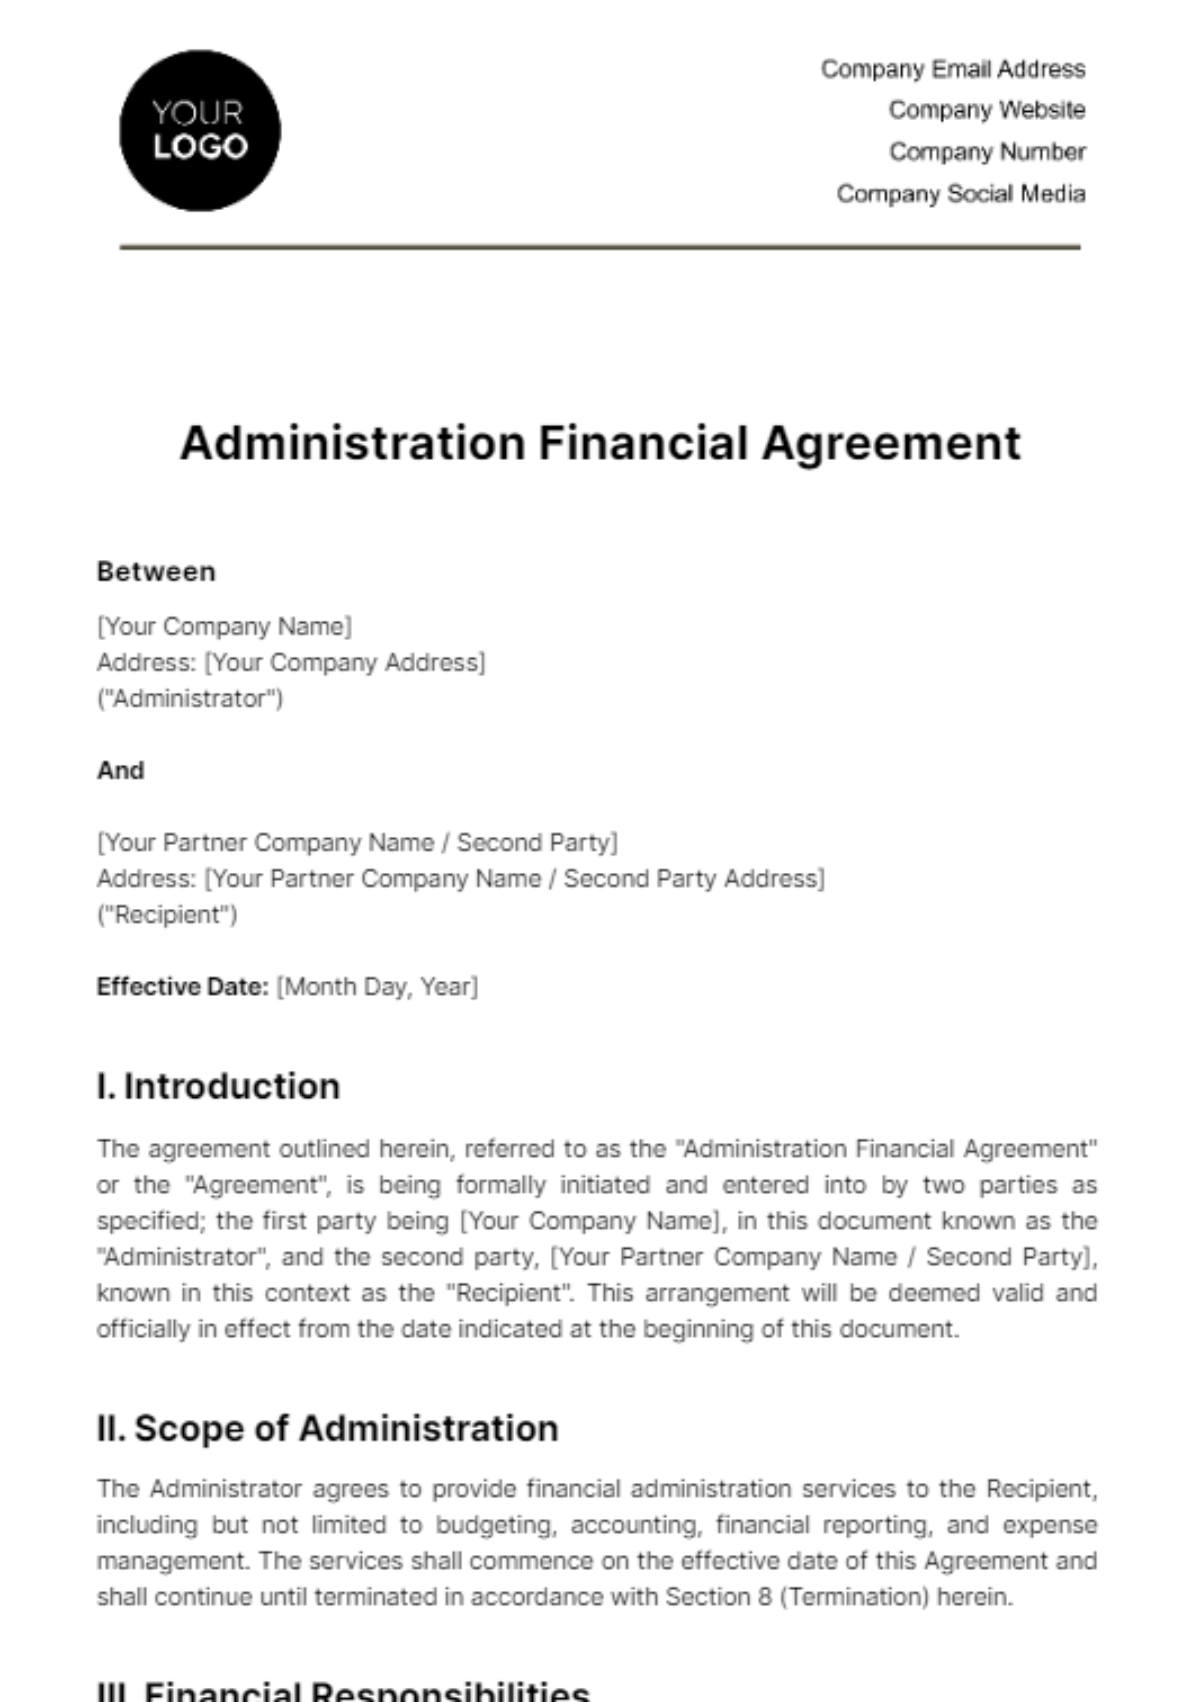 Administration Financial Agreement Template